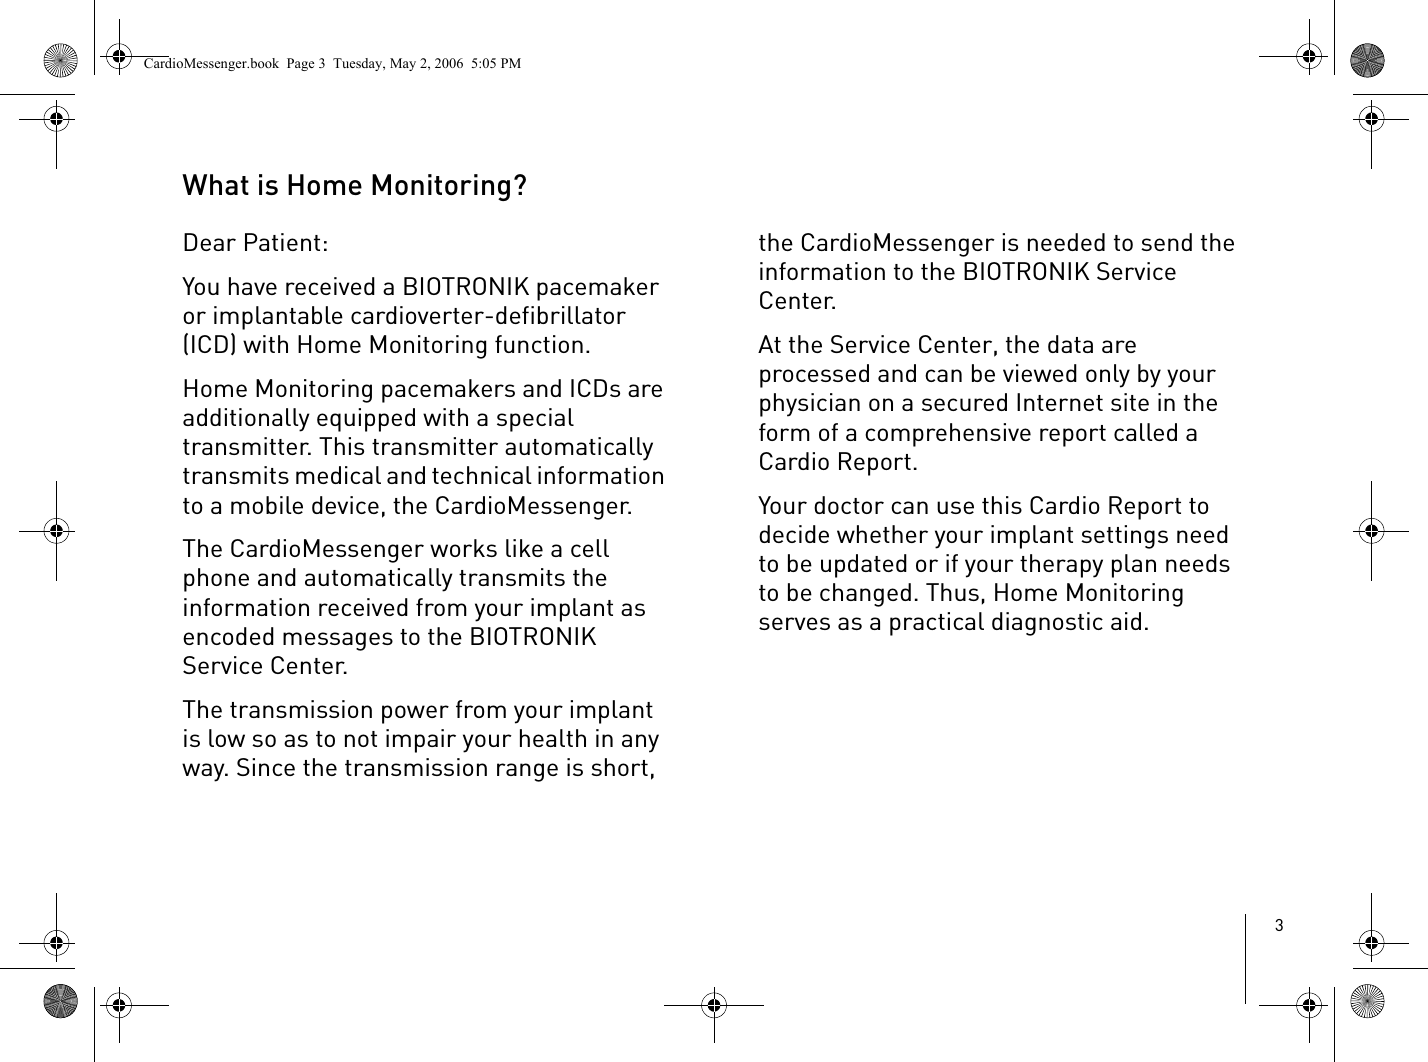 3What is Home Monitoring?Dear Patient:You have received a BIOTRONIK pacemaker or implantable cardioverter-defibrillator (ICD) with Home Monitoring function. Home Monitoring pacemakers and ICDs are additionally equipped with a special transmitter. This transmitter automatically transmits medical and technical information to a mobile device, the CardioMessenger. The CardioMessenger works like a cell phone and automatically transmits the information received from your implant as encoded messages to the BIOTRONIK Service Center.The transmission power from your implant is low so as to not impair your health in any way. Since the transmission range is short, the CardioMessenger is needed to send the information to the BIOTRONIK Service Center.At the Service Center, the data are processed and can be viewed only by your physician on a secured Internet site in the form of a comprehensive report called a Cardio Report. Your doctor can use this Cardio Report to decide whether your implant settings need to be updated or if your therapy plan needs to be changed. Thus, Home Monitoring serves as a practical diagnostic aid.CardioMessenger.book  Page 3  Tuesday, May 2, 2006  5:05 PM